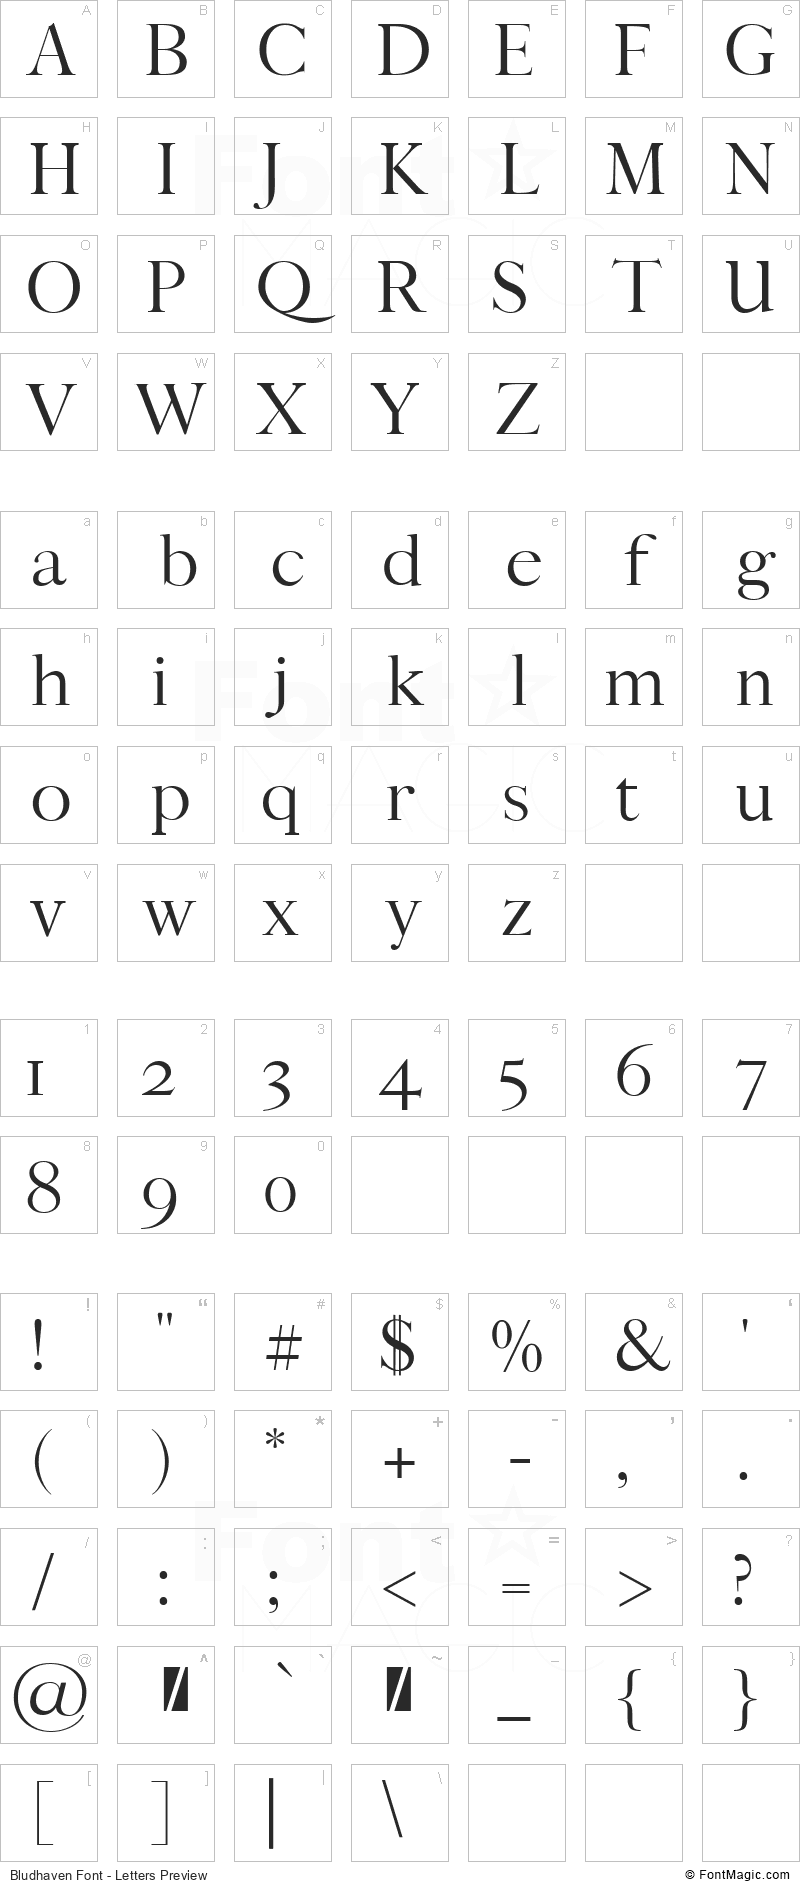 Bludhaven Font - All Latters Preview Chart